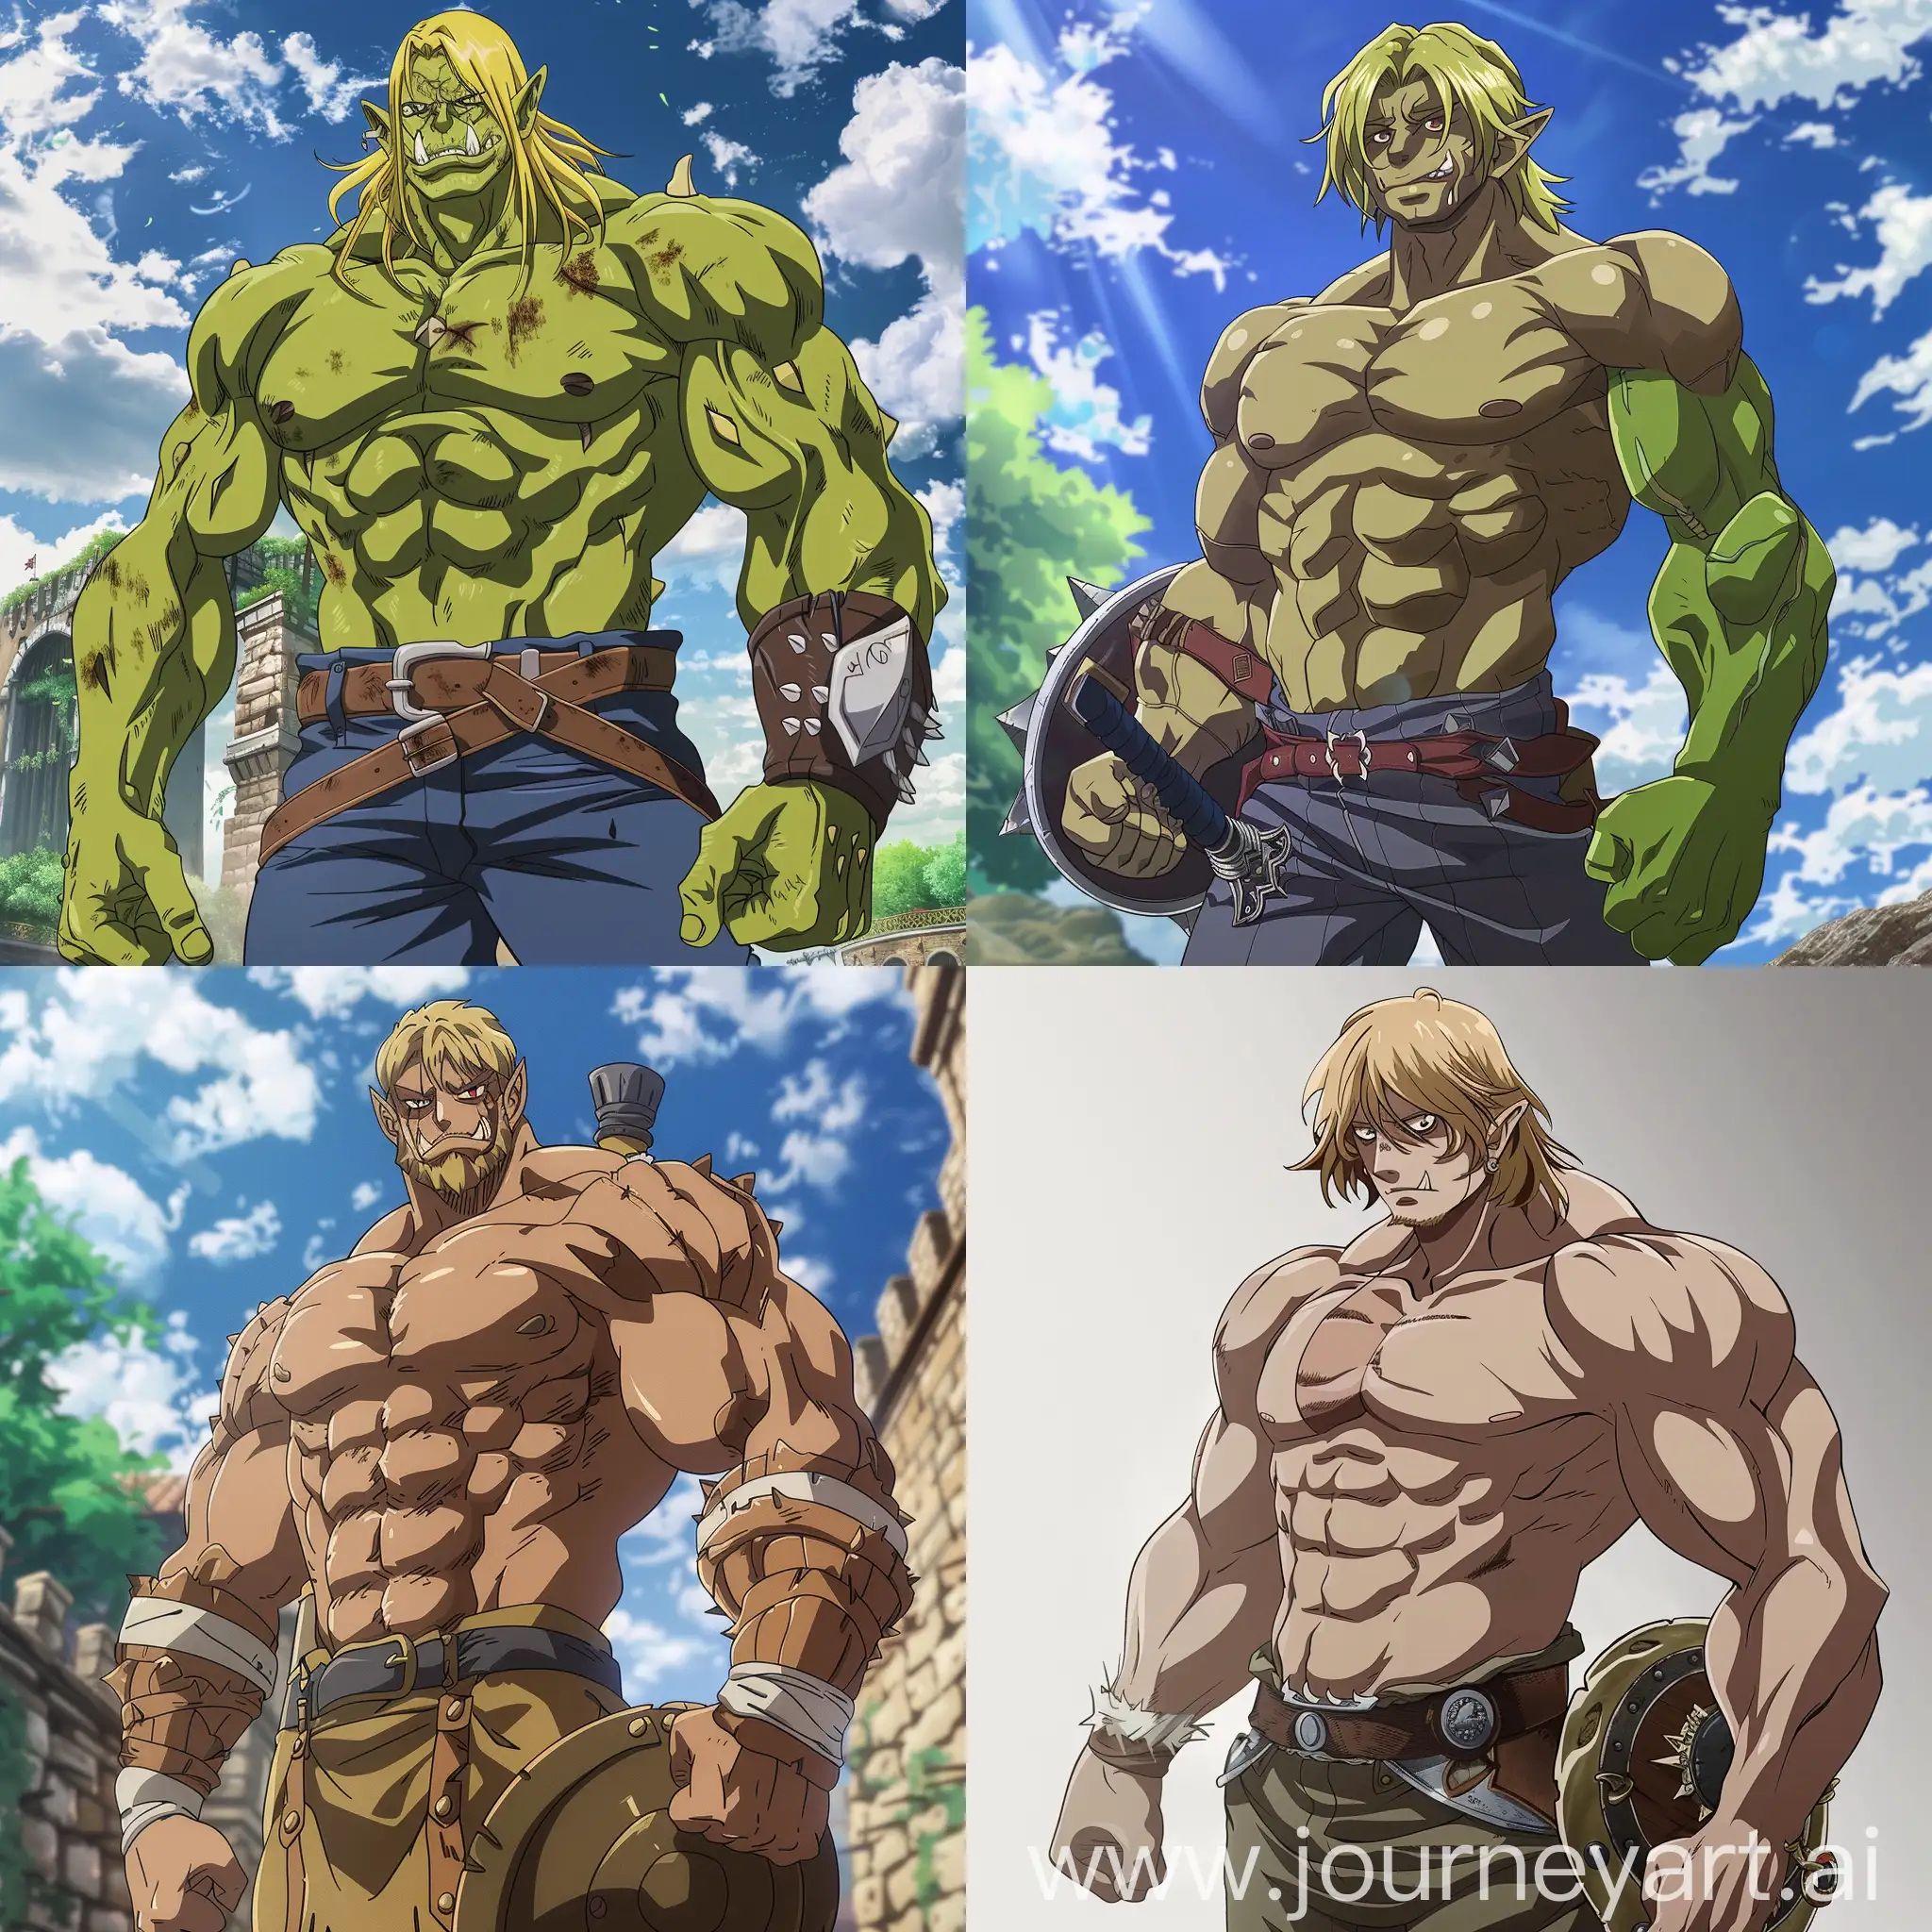 A muscular Escanor from the anime Seven Deadly Sins, but an orc. Without a weapon, with a buckler